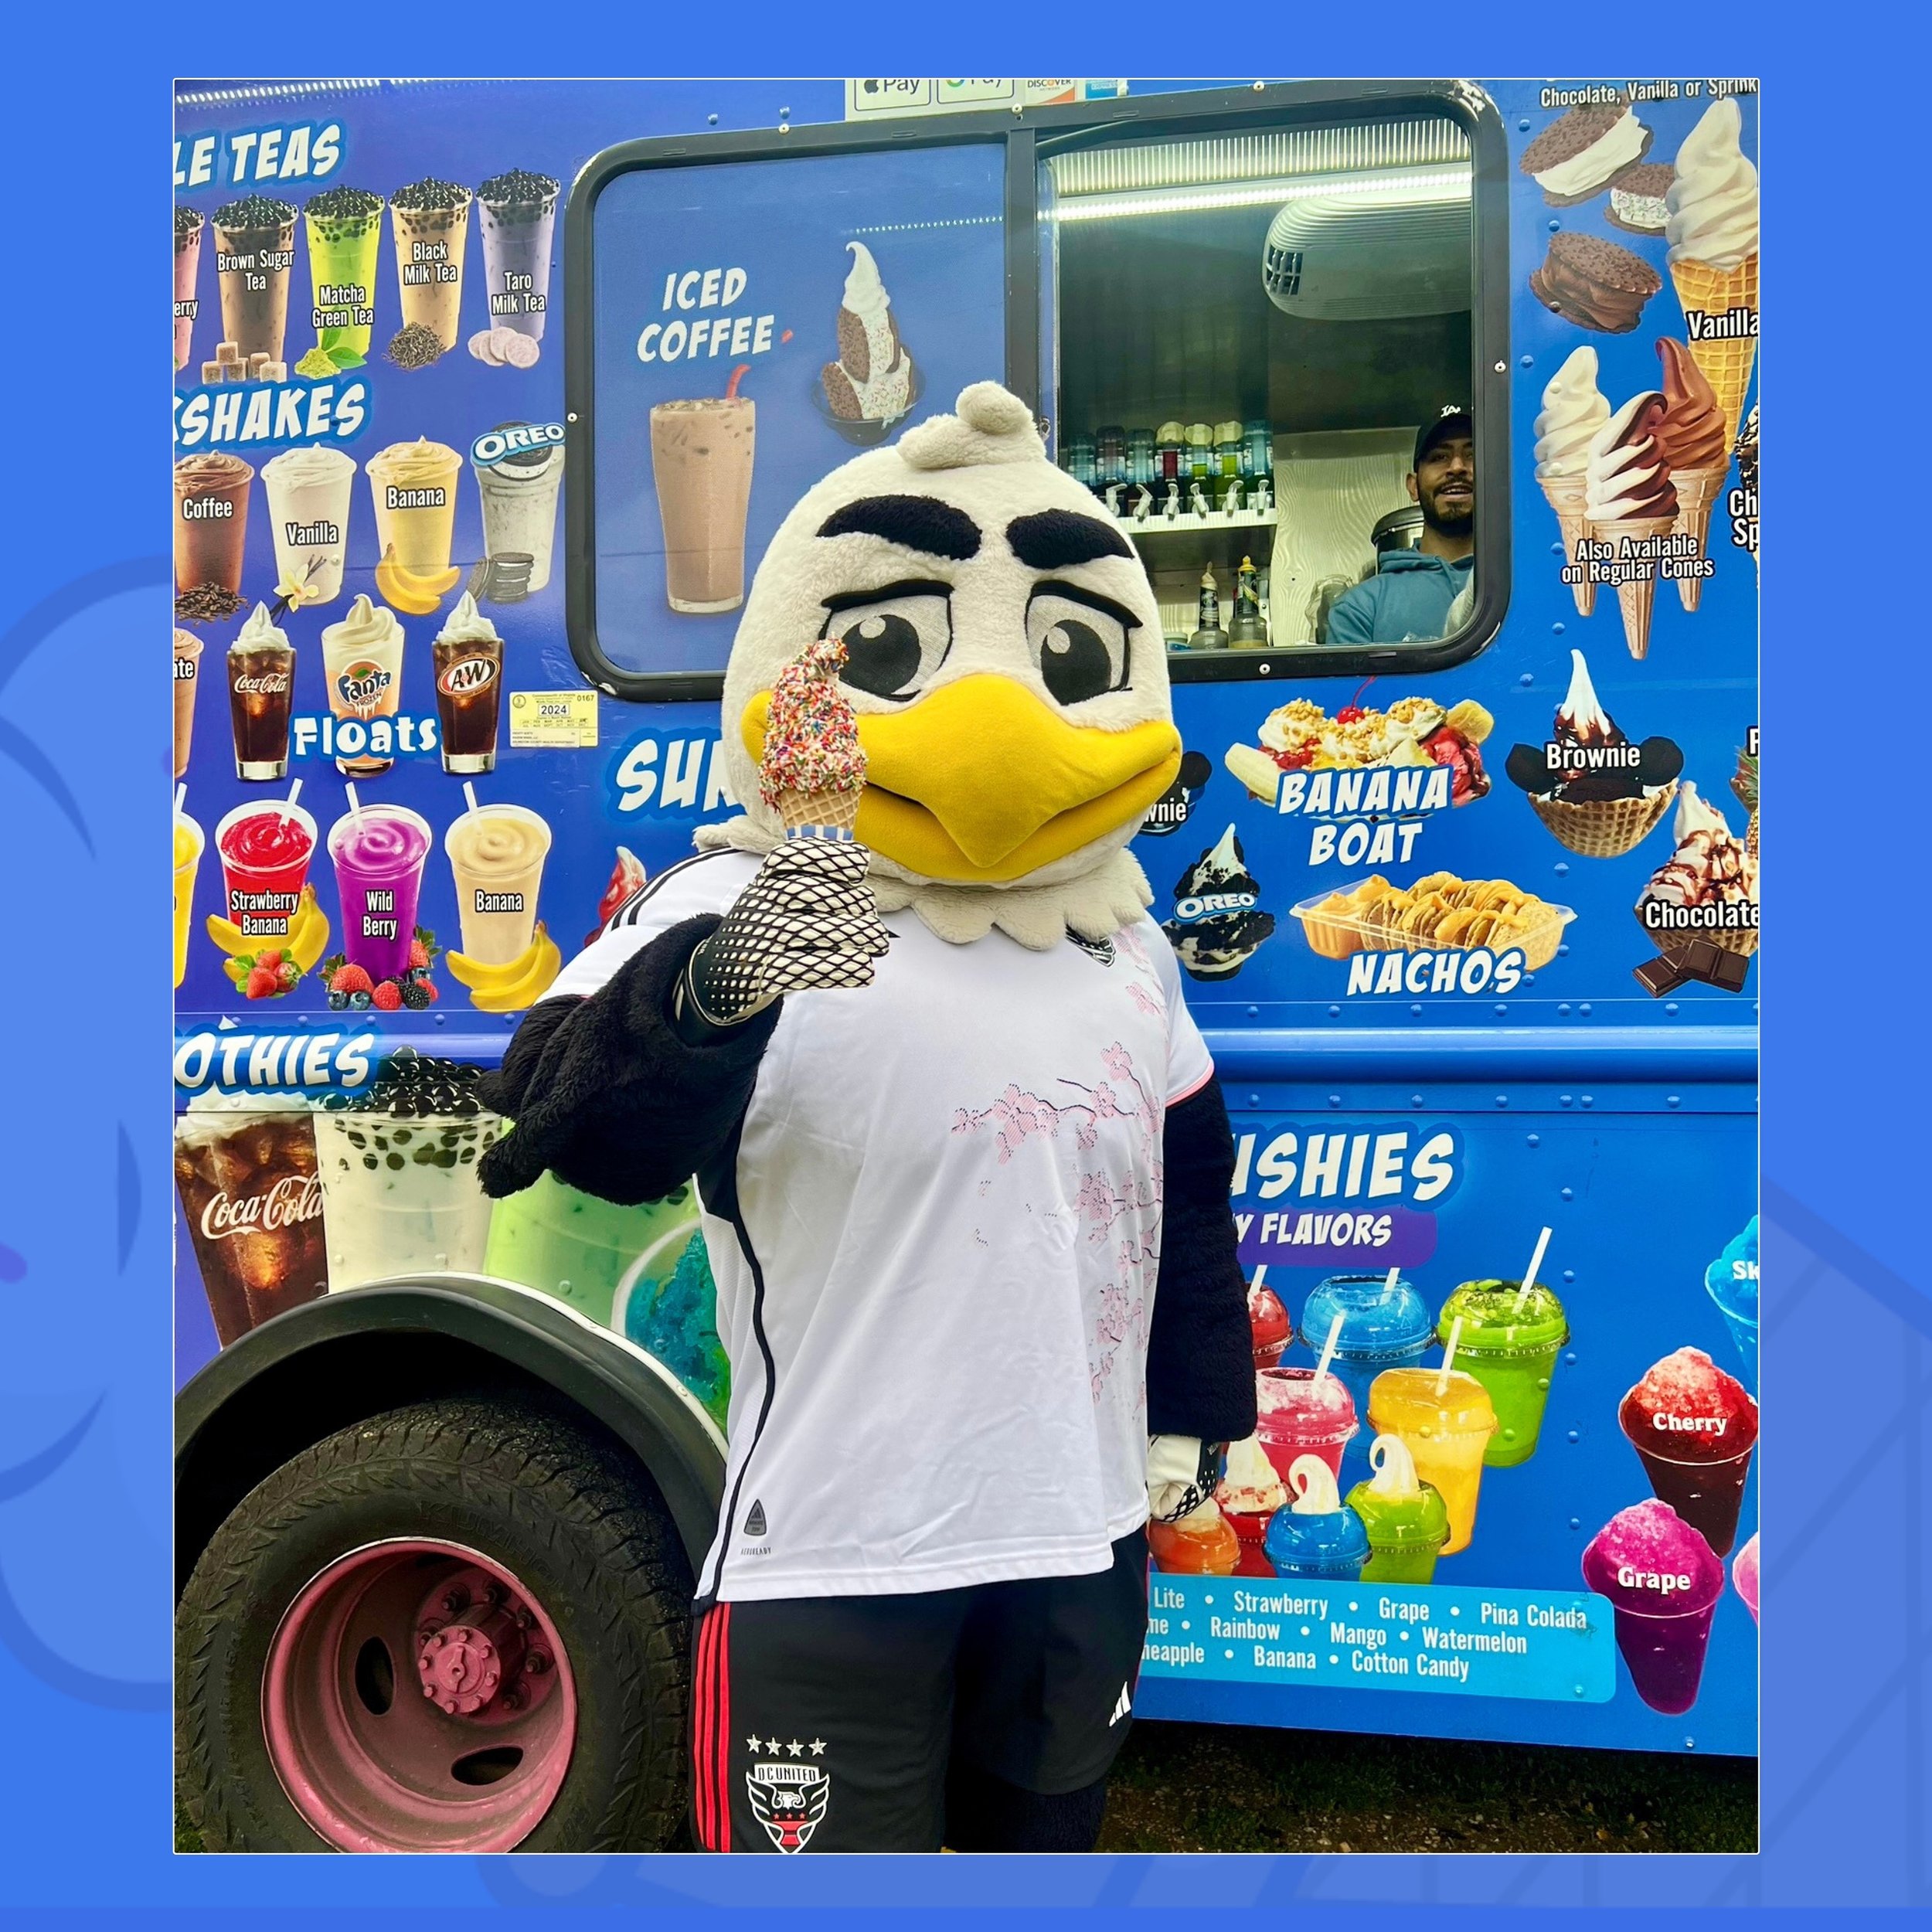 Celebrate every occasion with Frosty Softy's delightful treats and smiles! Book us for your next event

#FrostySofty #DMVCatering #DMVEvents #Catering #DMVFoodie #DMVParties #IceCream #DMVWeddings #DMVCorporateEvents #DMVEventPlanning #SweetTreats #D